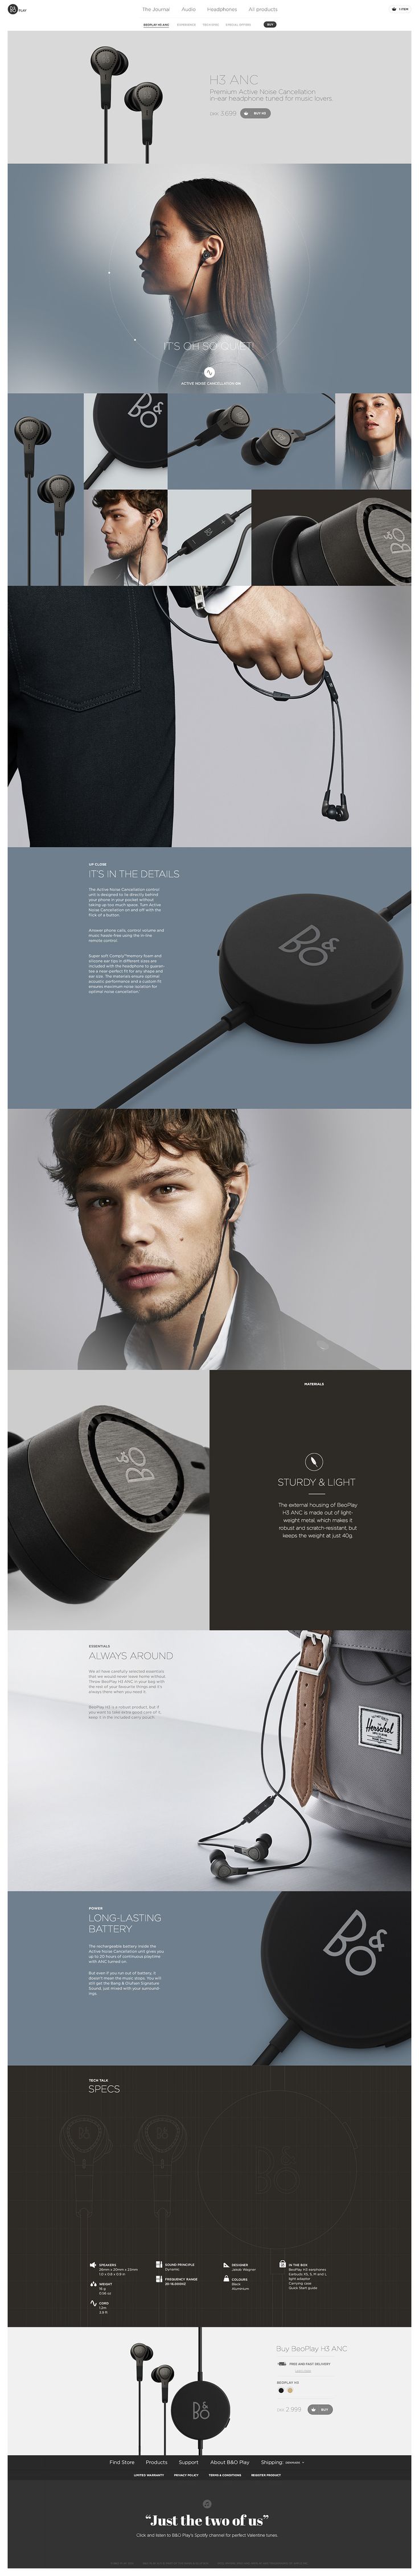 BeoPlay H3 by SÃ¸ren Smidt